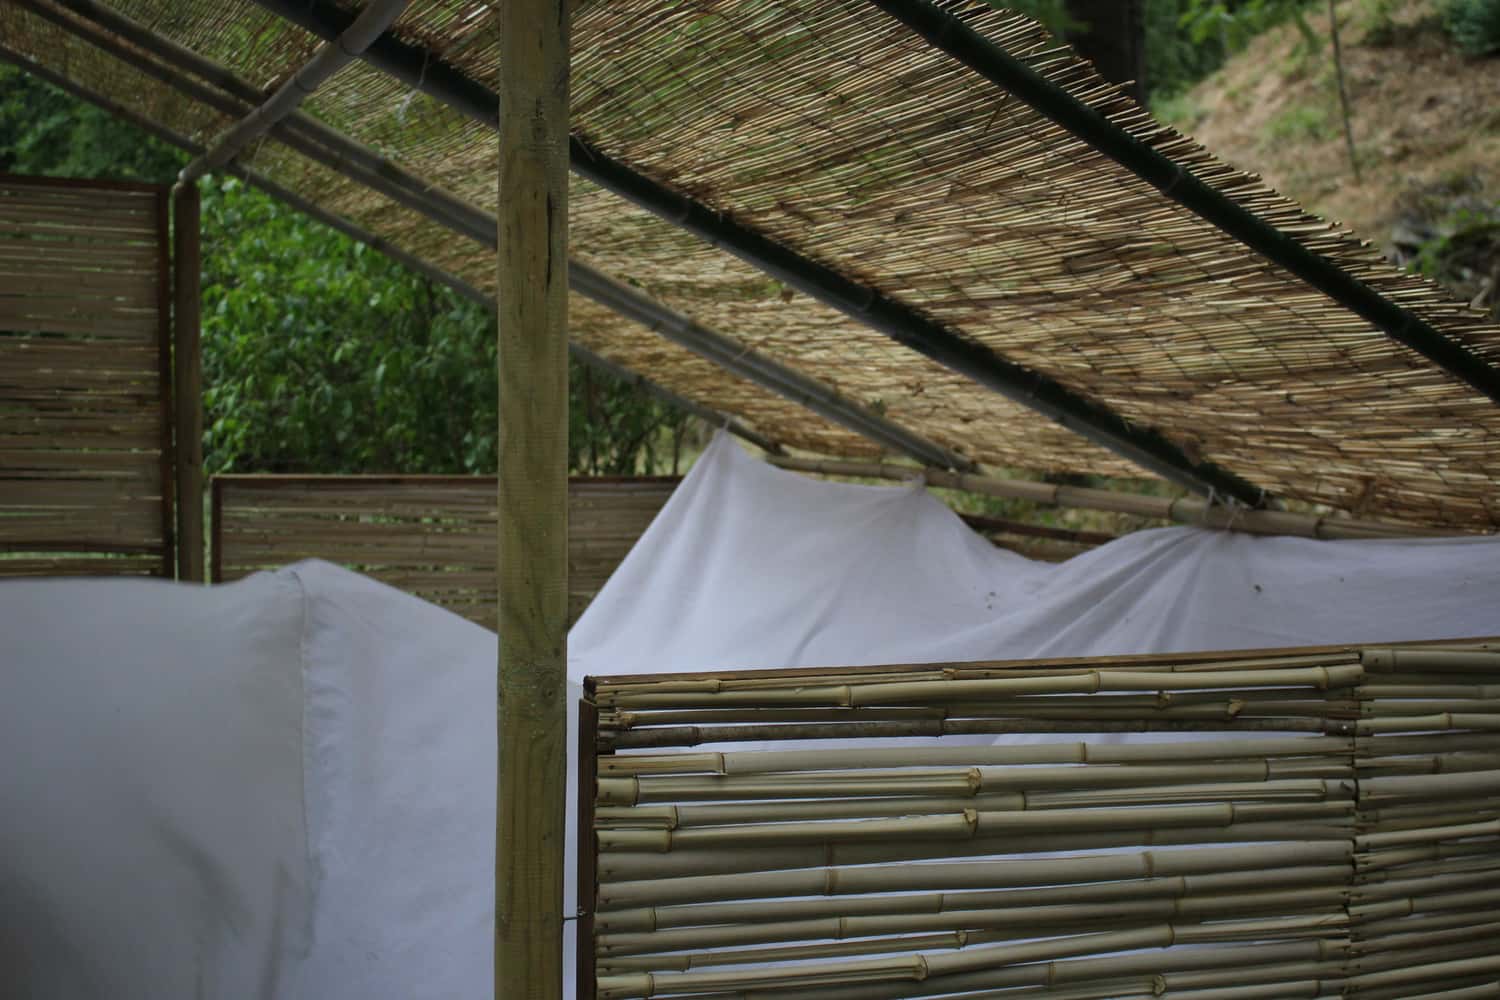 We added a cotton tent that gives privacy and protects from mosquitos